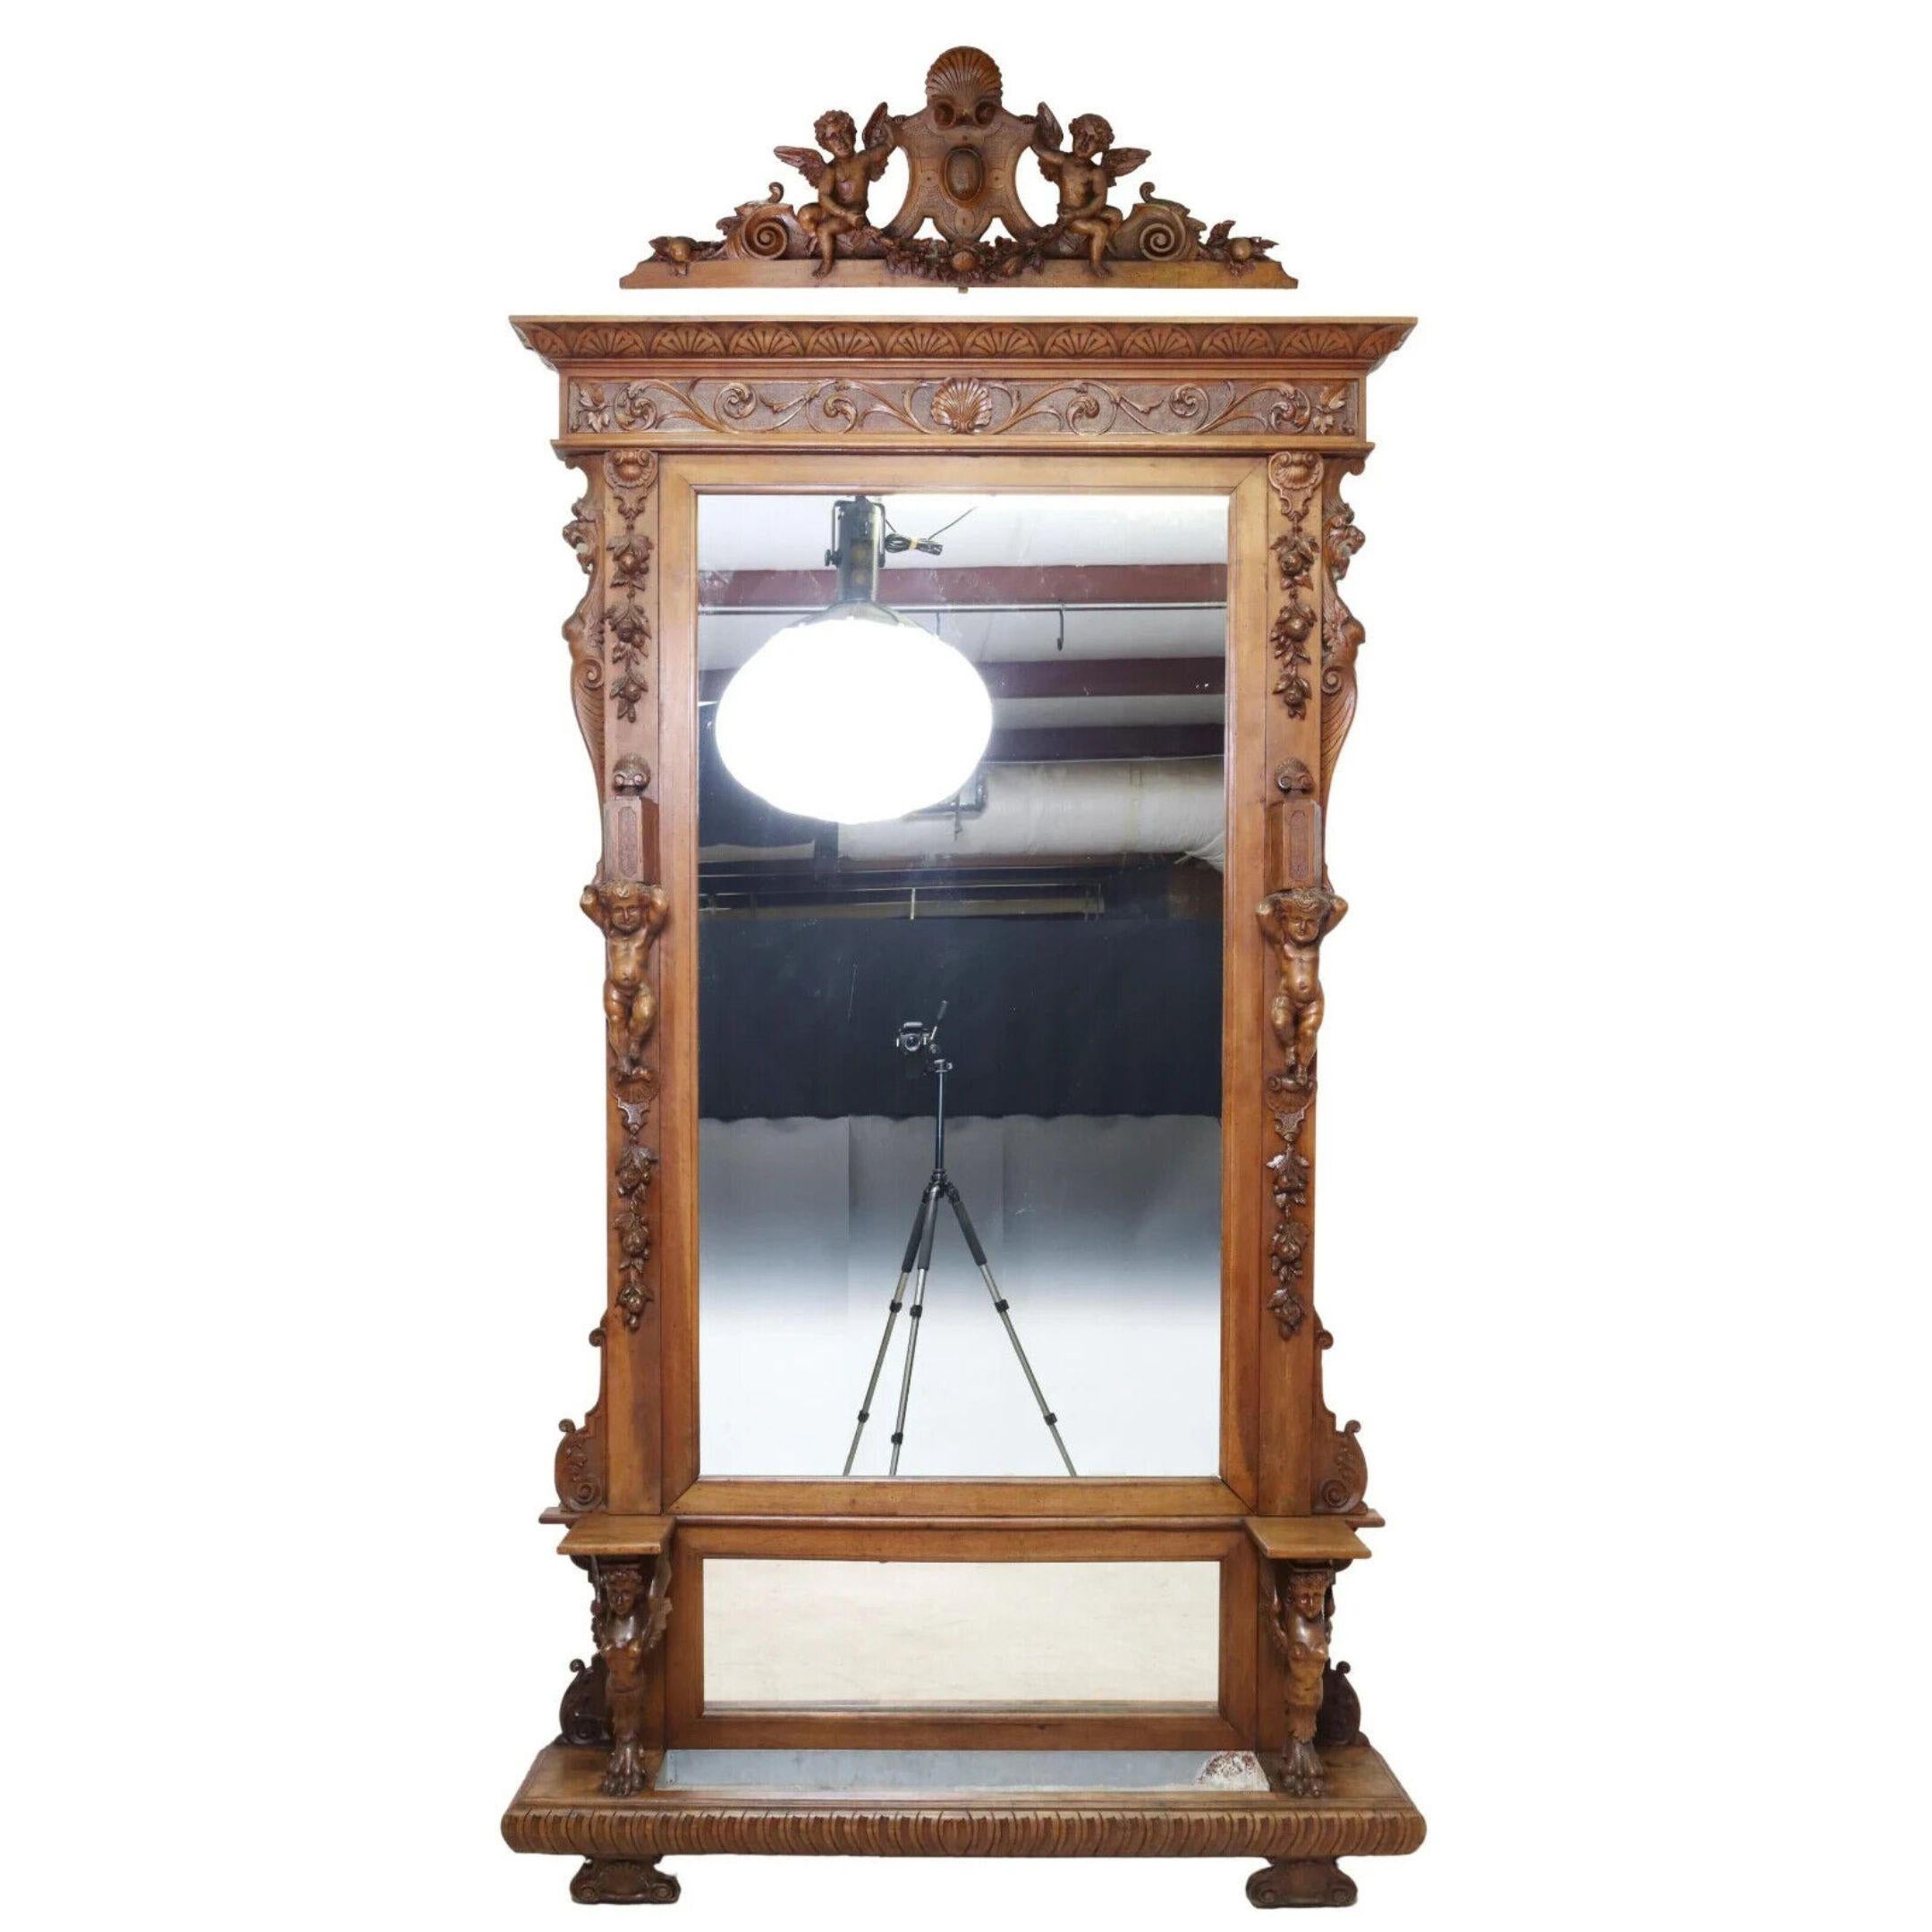 Stunning  Antique Jardinere, Italian, Renaissance Revival Mirrored, Crest, Cornice, 1800s, 19th Century!

This antique hall tree is a stunning piece of Italian Renaissance Revival carved walnut furniture, perfect for adding a touch of elegance to